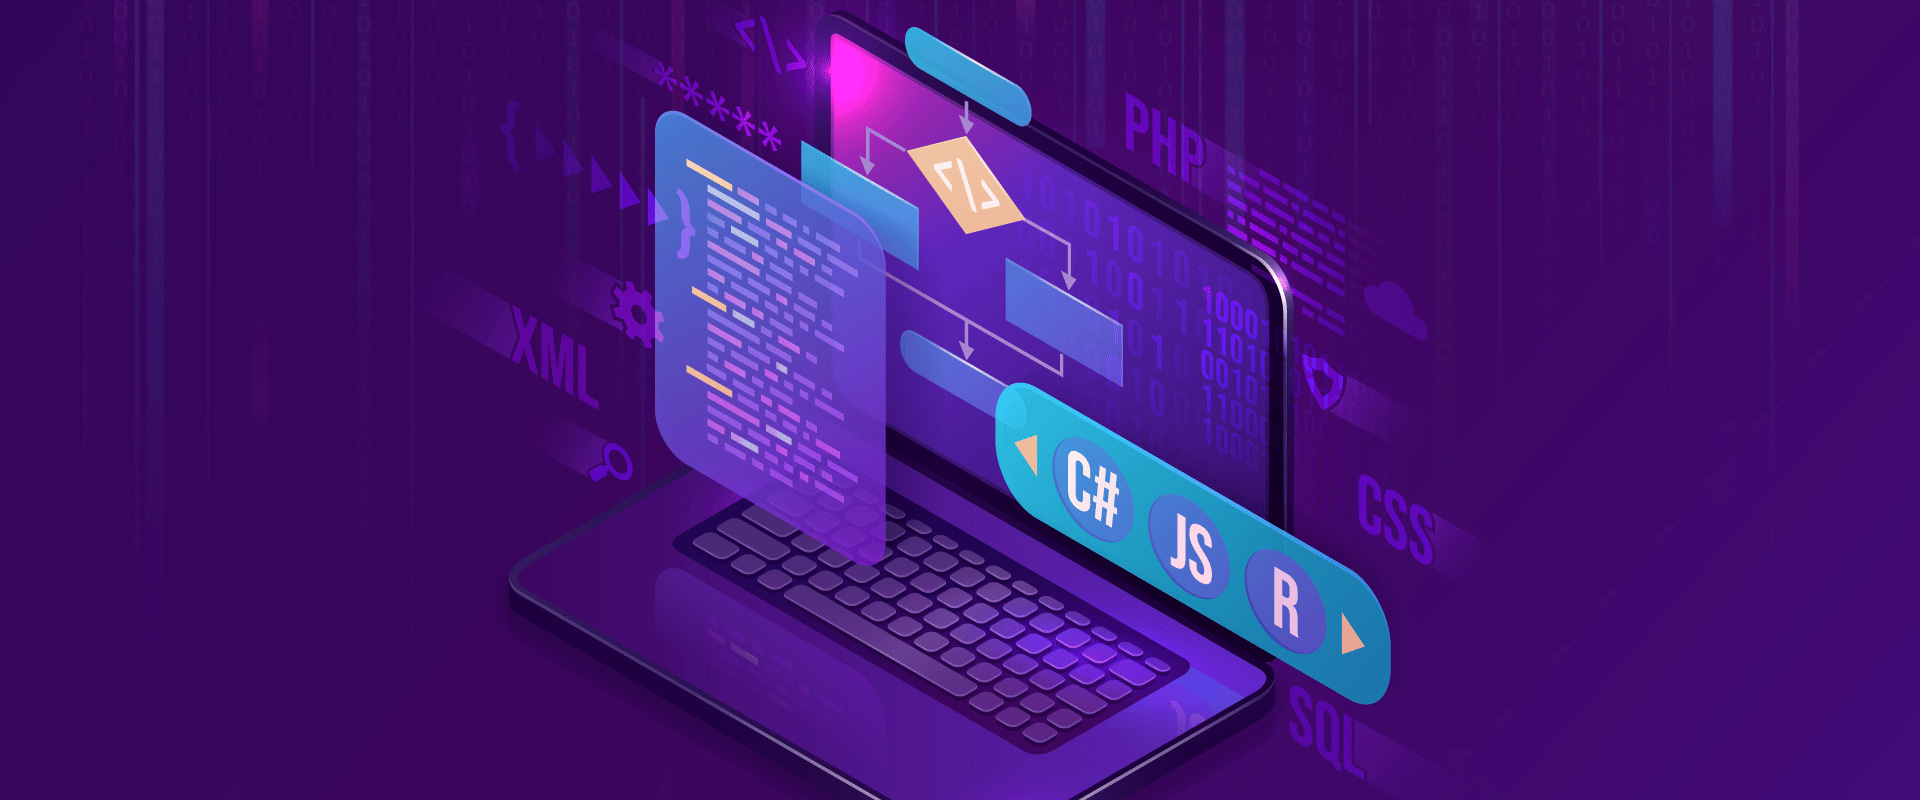 Customising Software With CSS For Beginners